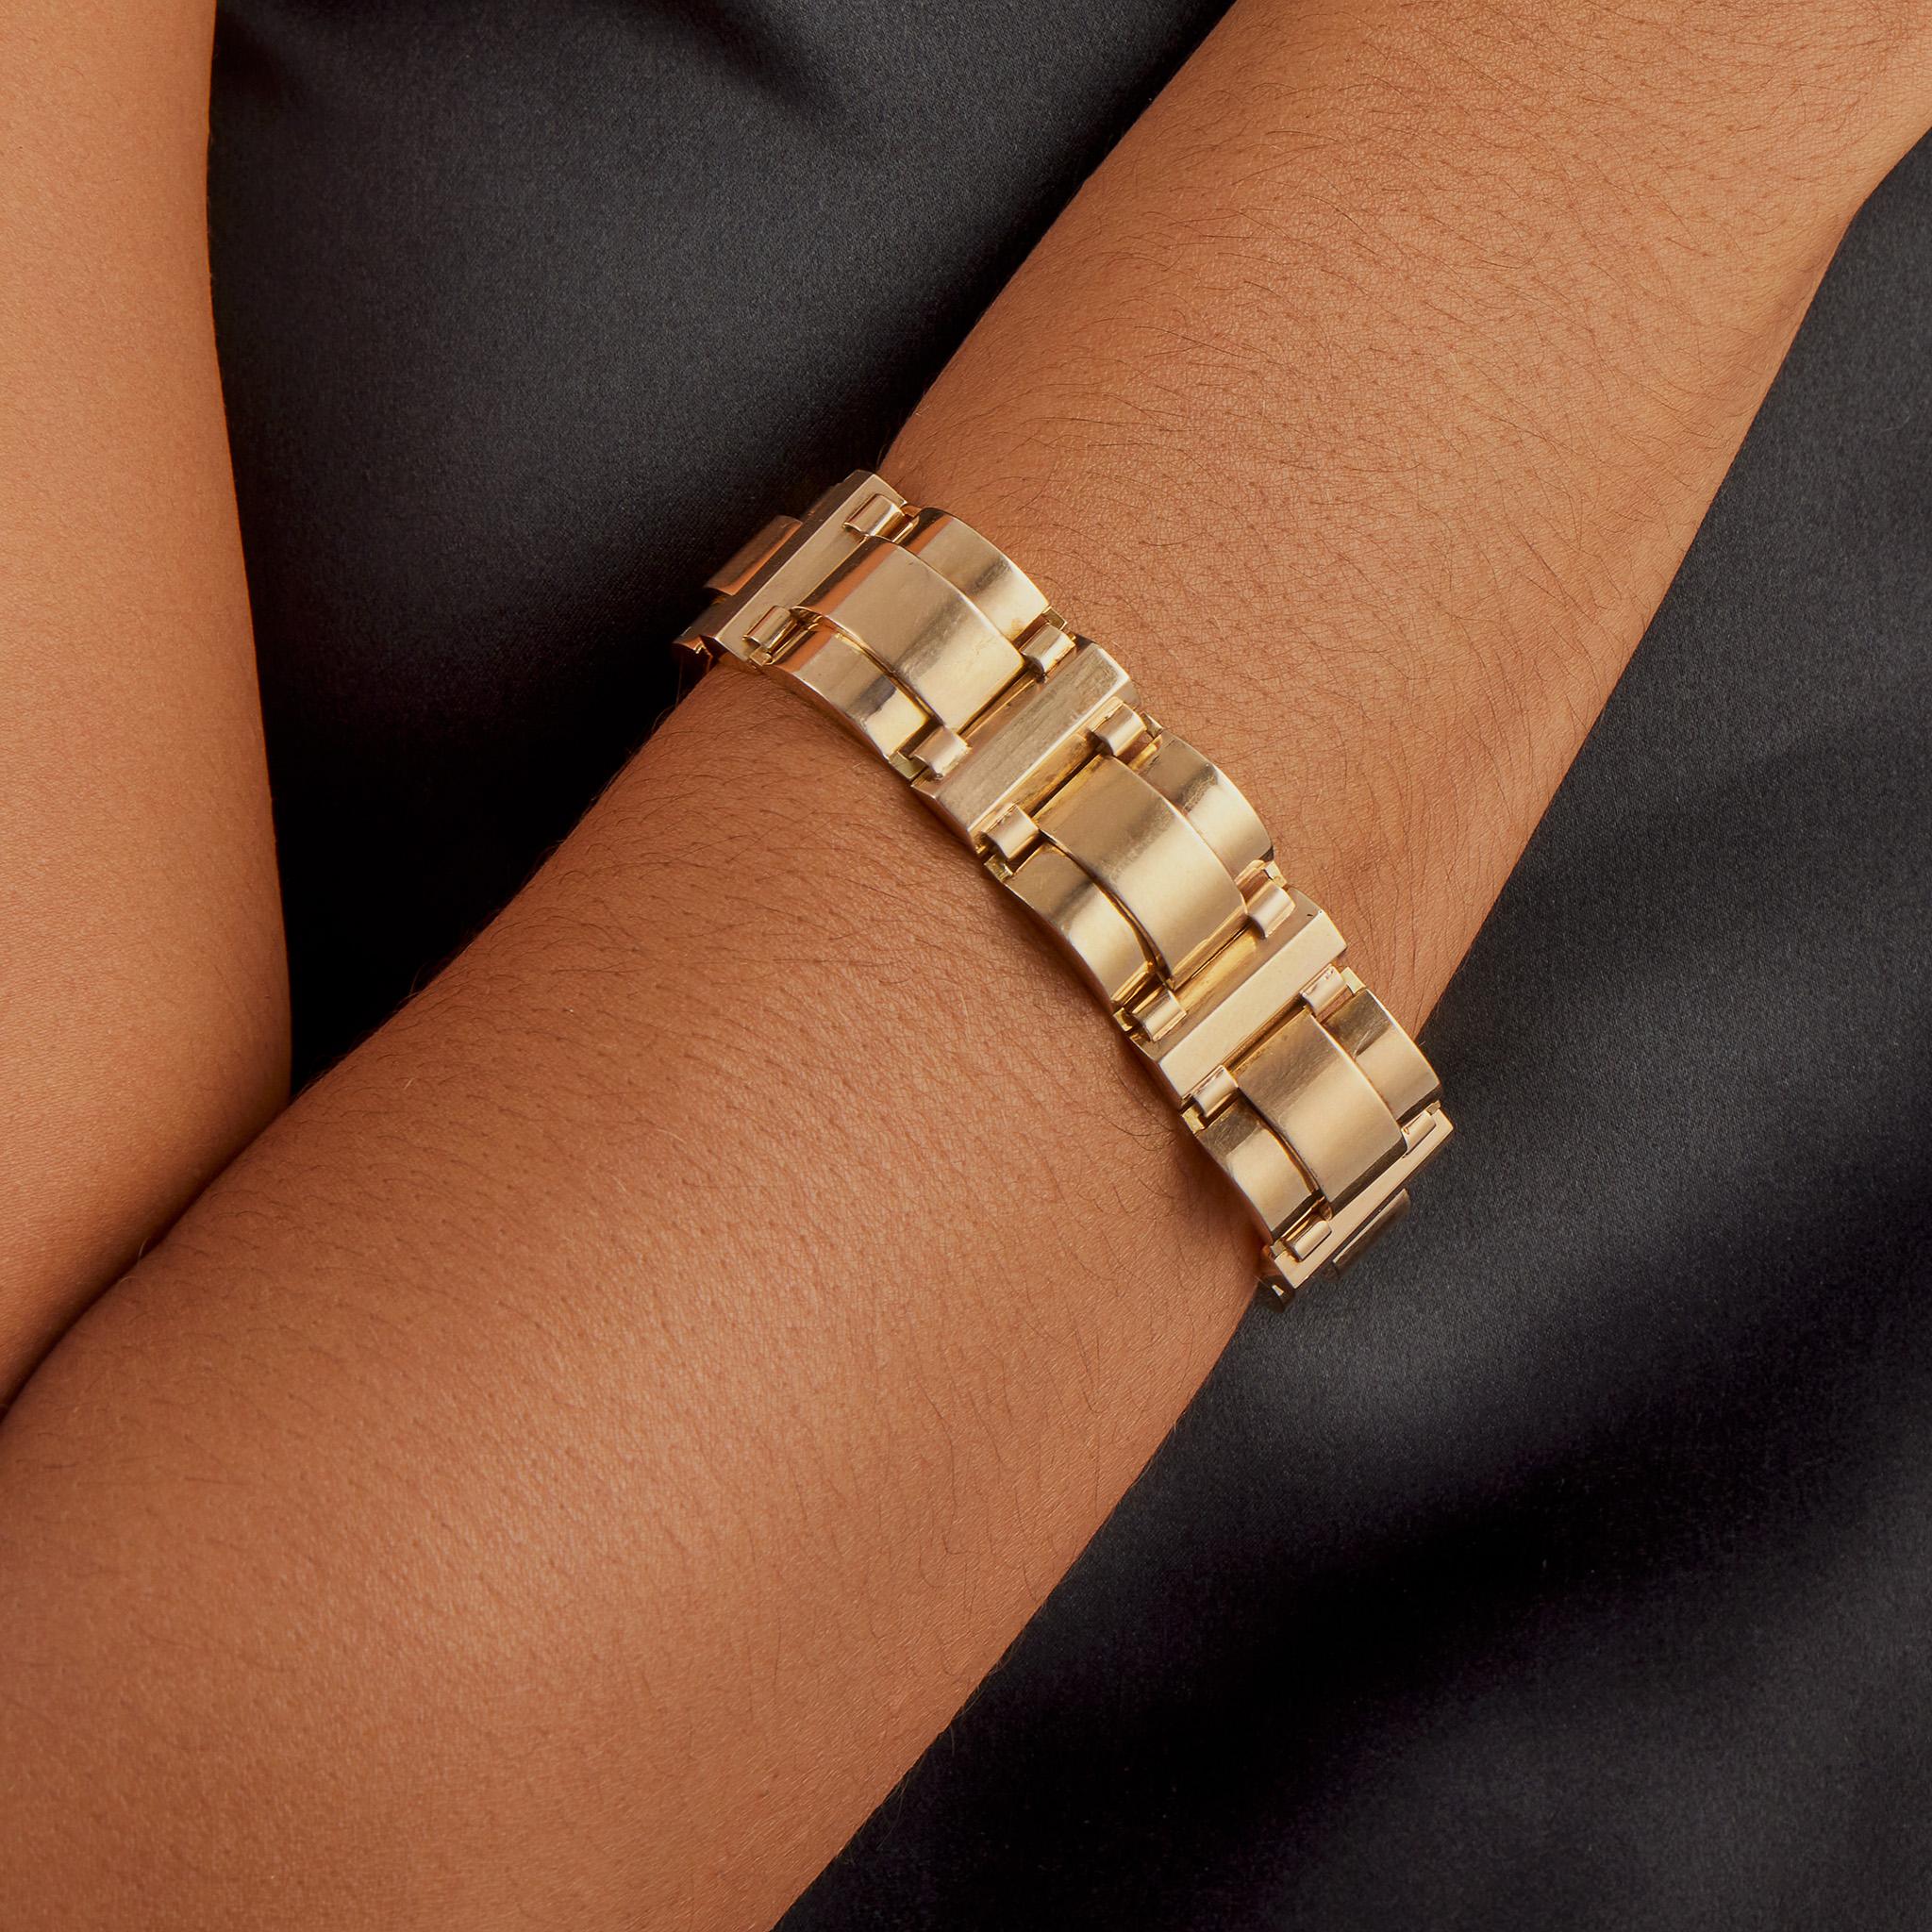 Created in the 1940s, this French Retro bracelet by Renard, Paris, is composed of 18K gold. It is composed of arched and stepped bombé links joined by faceted bars. With its complex and interlinking geometry, this refulgent gold bracelet has a